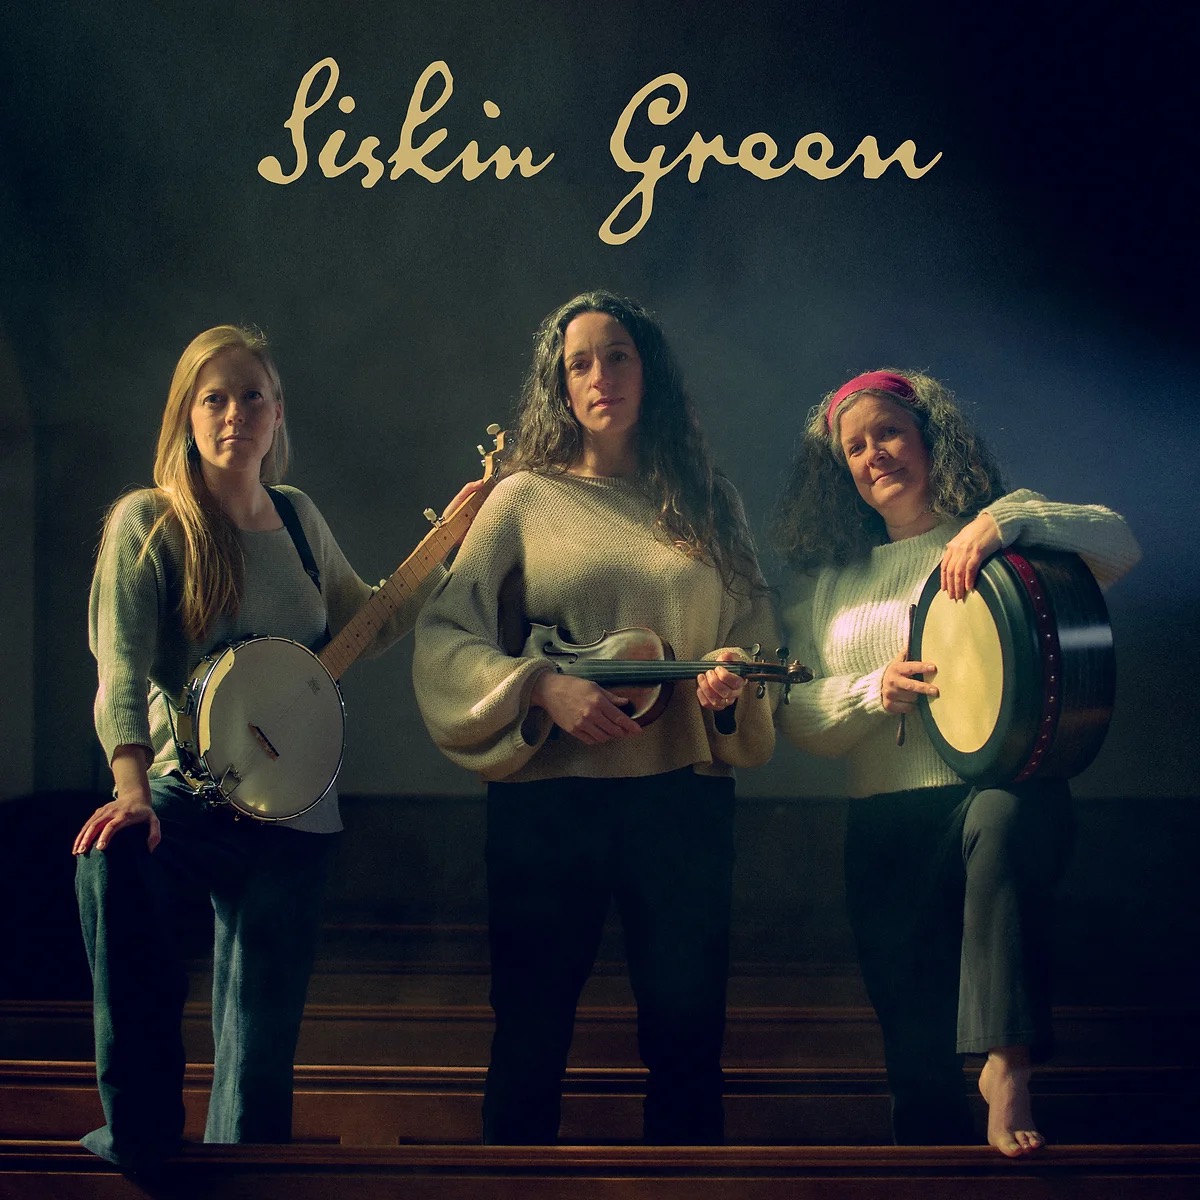 Tune in to Fine Folk on LCRFM 103.6FM (lcrlincoln.com) on Tuesday 12th December at 7.00pm to listen to an interview featuring Alan Ritson speaking to the trio Siskin Green. Check out our Listen Again option at (mixcloud.com/LCRFMLincoln)